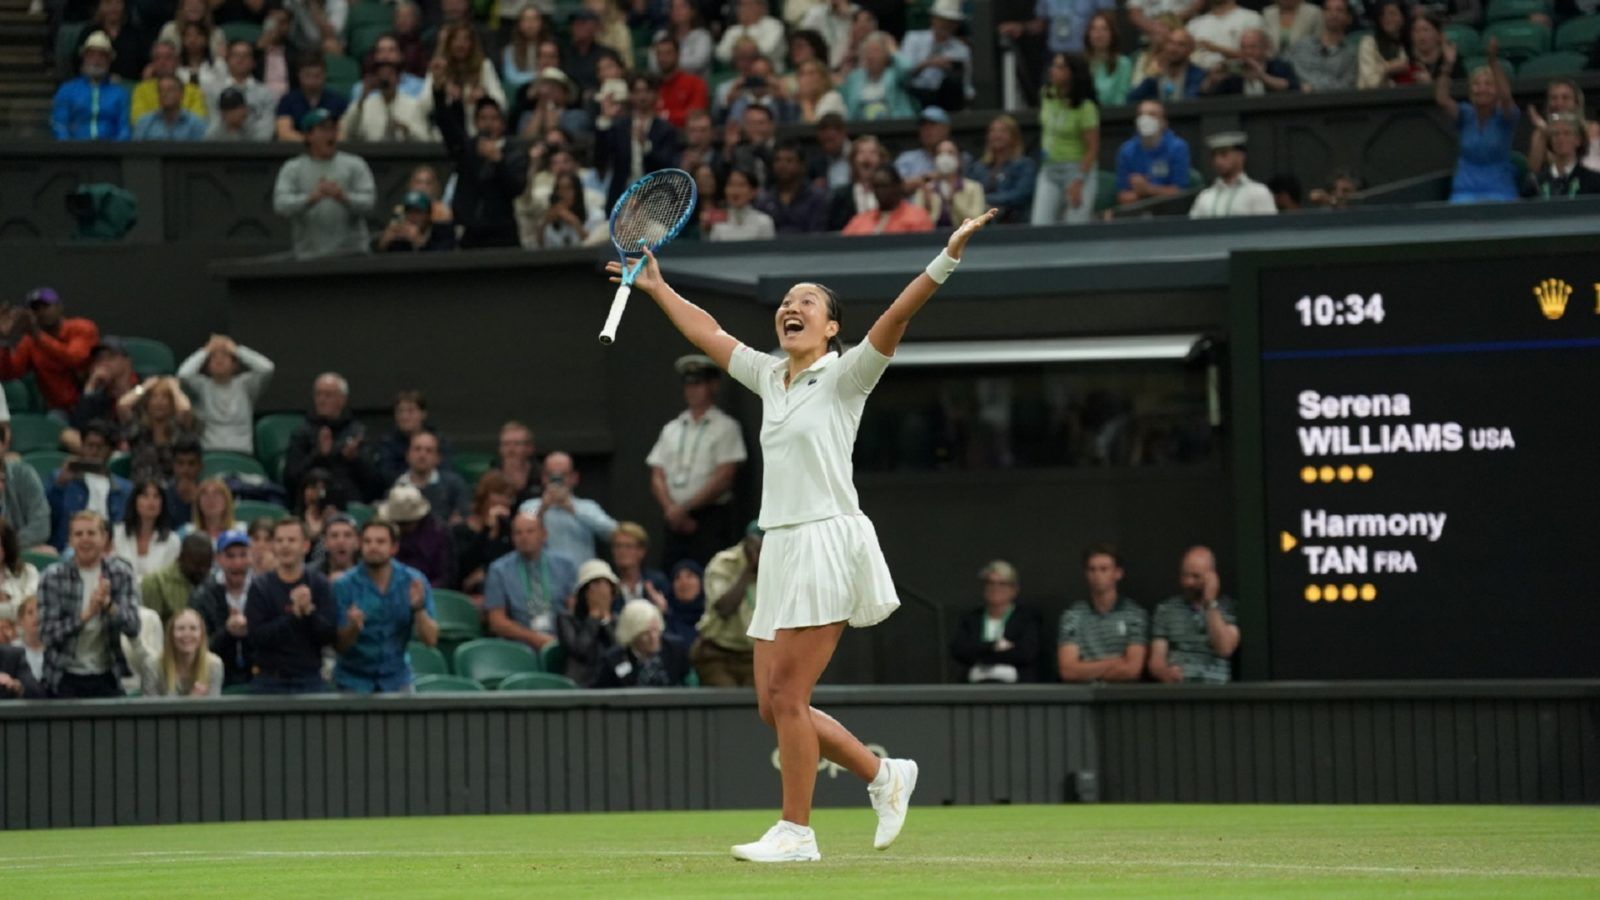 Who is Harmony Tan, the French tennis player who defeated Serena Williams at Wimbledon 2022?